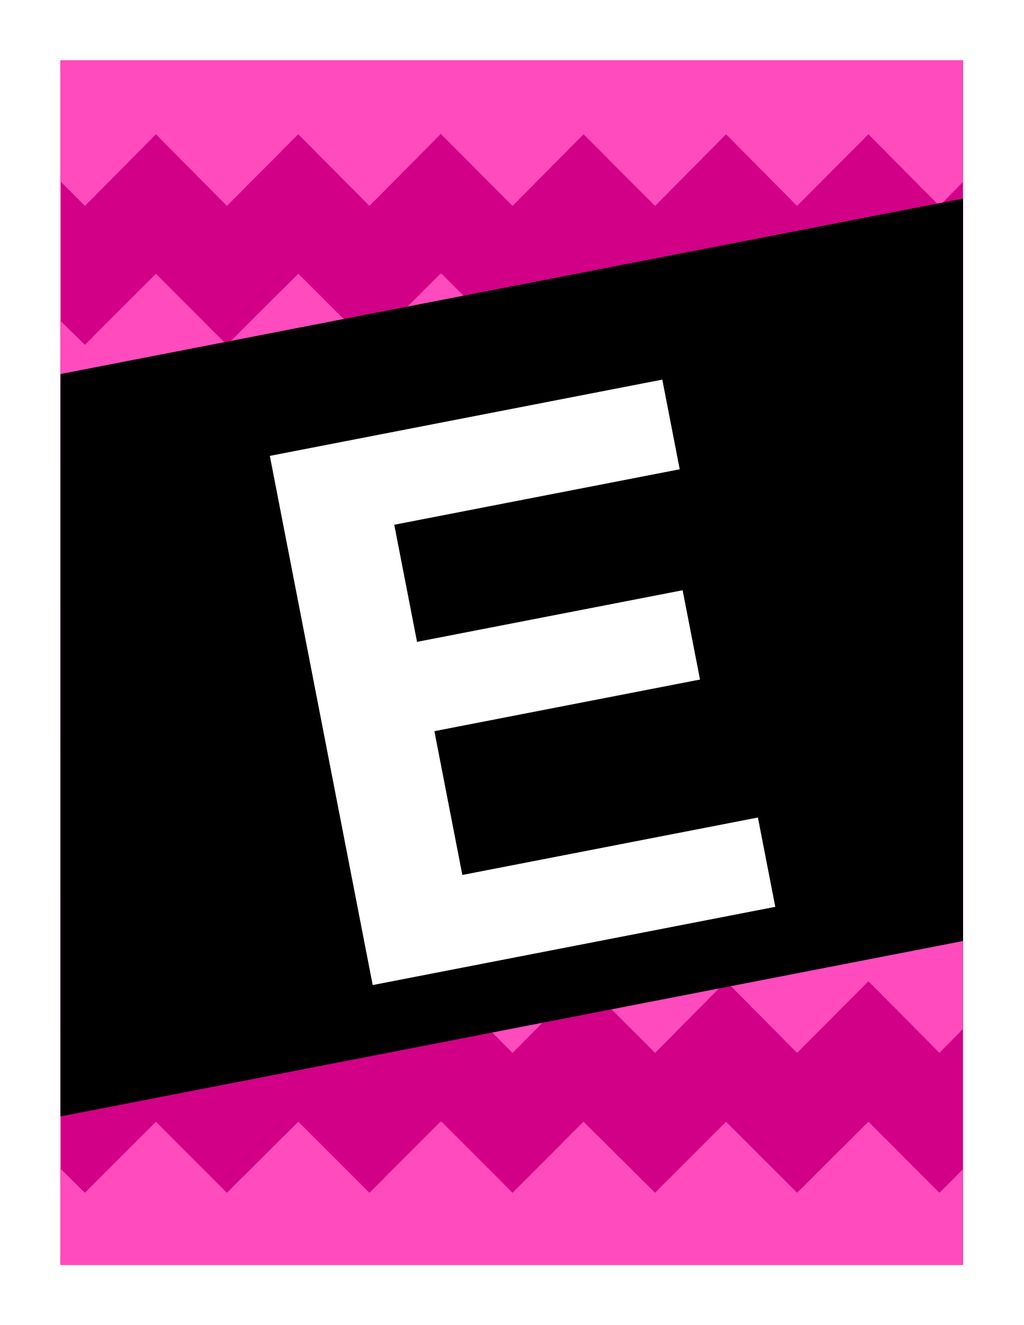 e Customize this banner with your own message. Select the letter and add your own text.